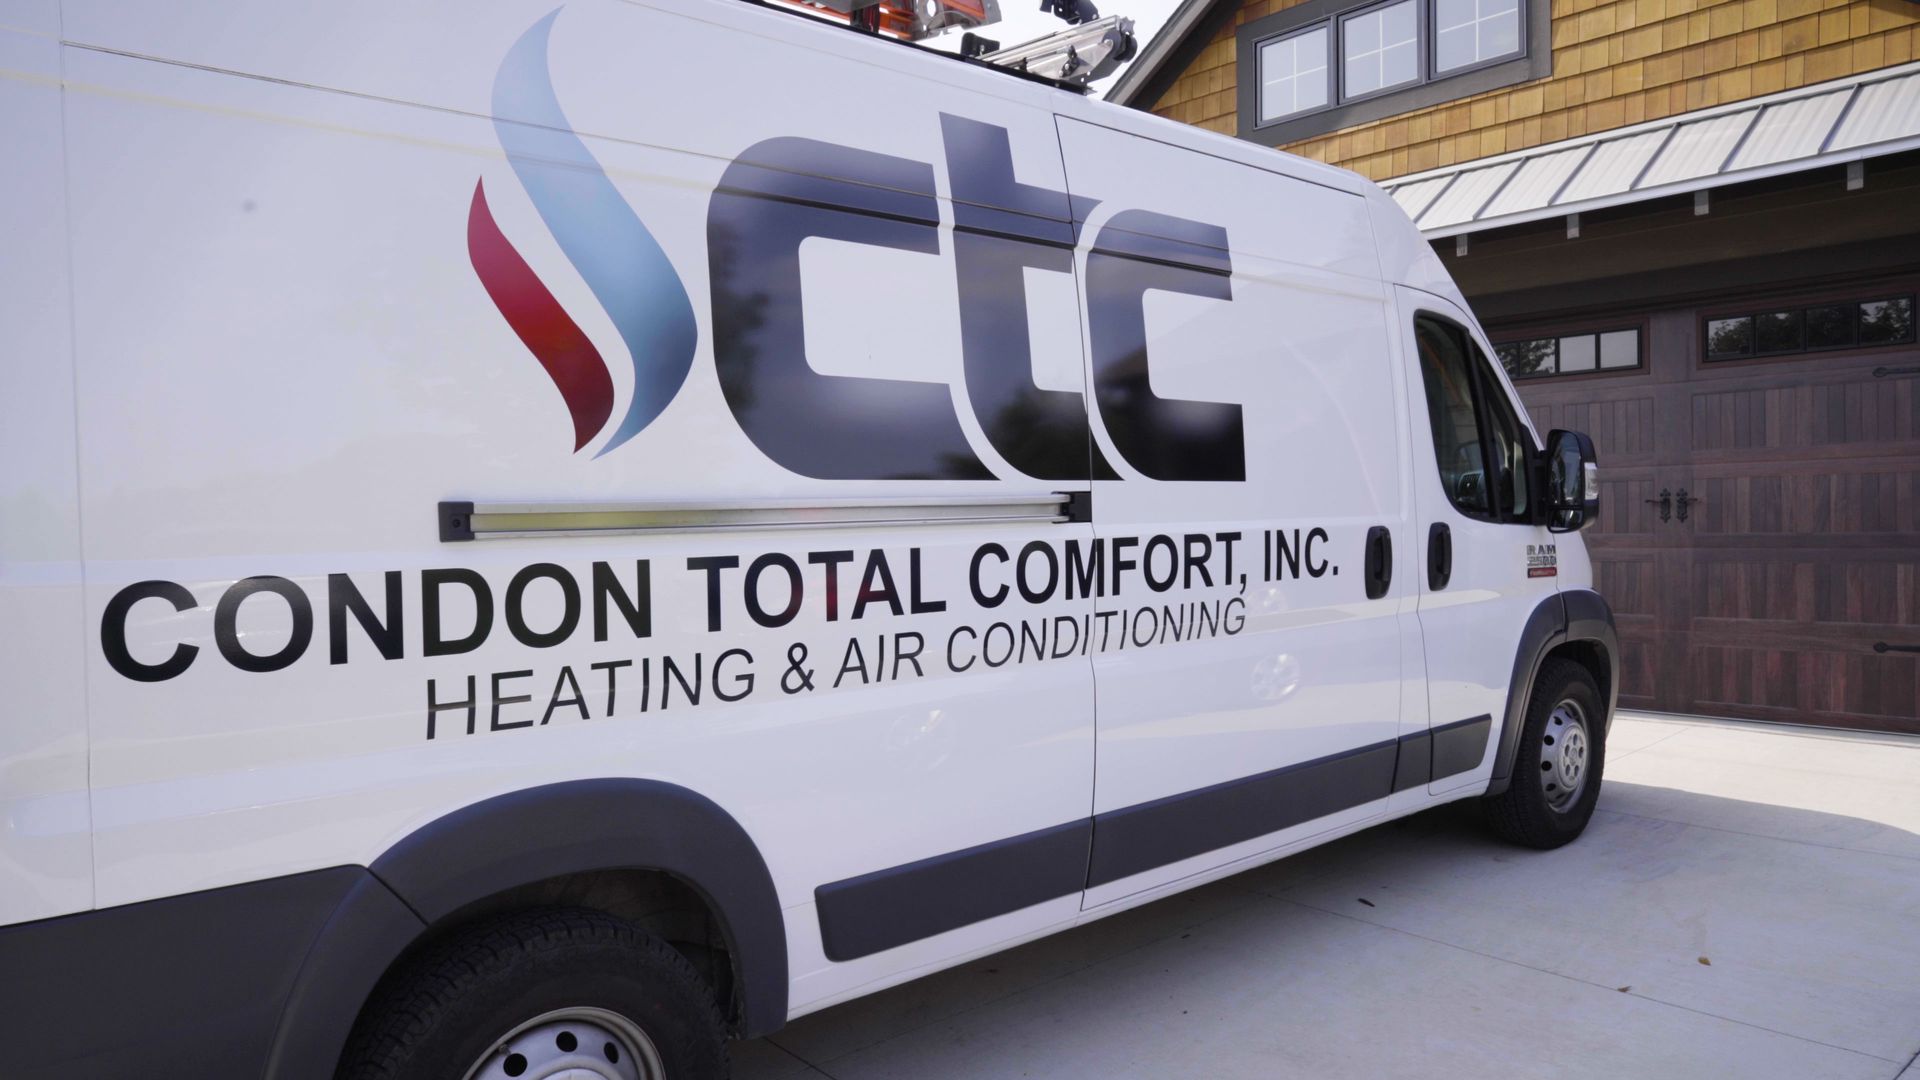 Condon Total Comfort service technician van parked in front of a house.